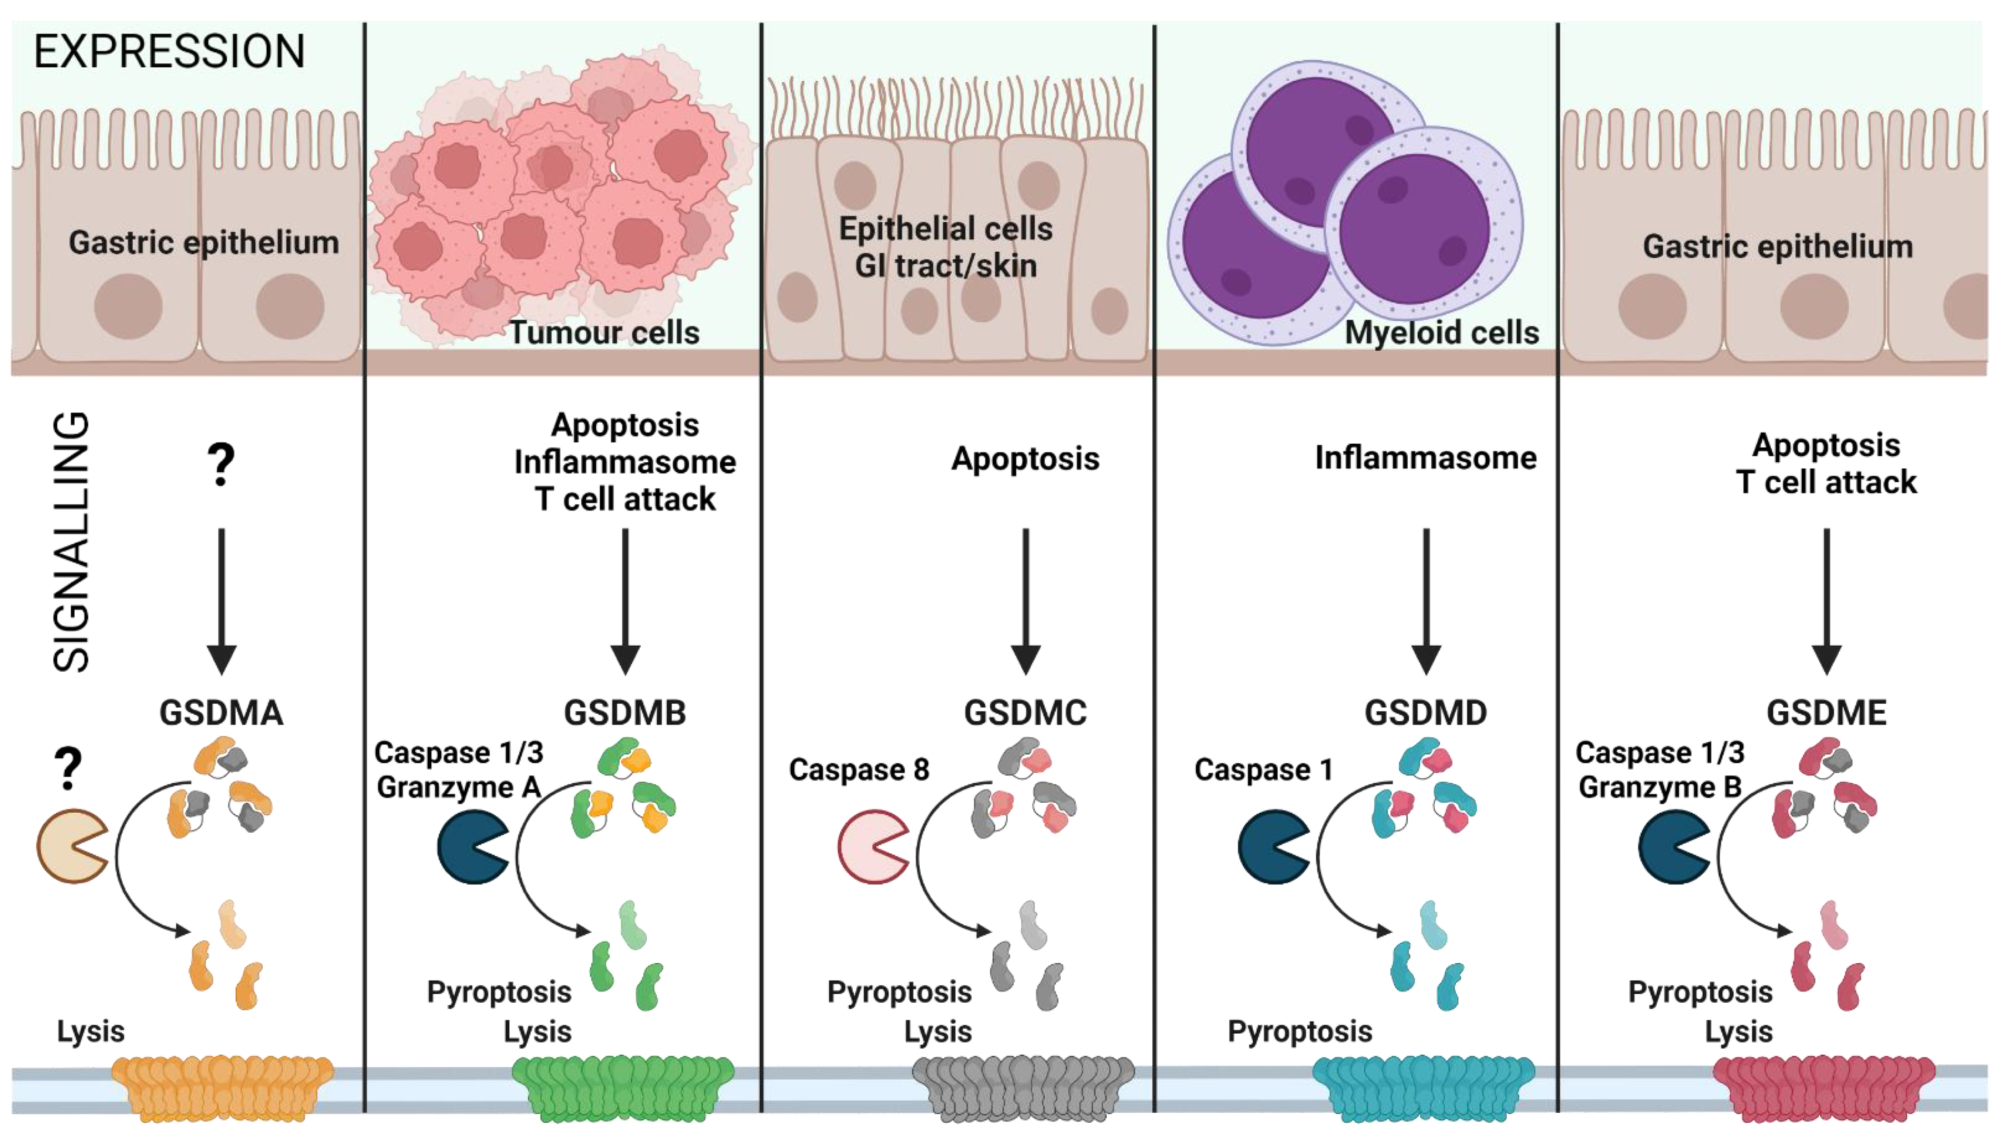 Gasdermin family: tissue-specific signaling. Gasdermin A/B/C/D/E are expressed in distinct cell types and are activated by various signals, leading to inflammatory or non-inflammatory cell lysis. The upstream events of GSDMA cleavage are not well characterized (represented as ‘?’). GSDMA downregulation in gastric epithelial cells can lead to tumor formation. Proliferating tumor cells are recognized by effector T cells that release Granzyme A, which cleaves GSDMB in cancer cells leading to pore formation and tumor cell lysis. Furthermore, GSDMB can also be activated by Caspase 1 or 3 downstream of inflammasome formation or apoptosis, leading to pyroptosis. GSDMC is activated by Caspase 8 downstream of apoptosis, linking apoptosis to pyroptosis. GSDMD is the best characterized GSDM effector molecule, cleaved downstream of inflammasome activation, leading to pyroptosis. Similar to GSDMC, GSDME links apoptosis to pyroptosis subsequent to cleavage by Caspase 3 in apoptotic cells. (Created with BioRender.com on 7 May 2022).